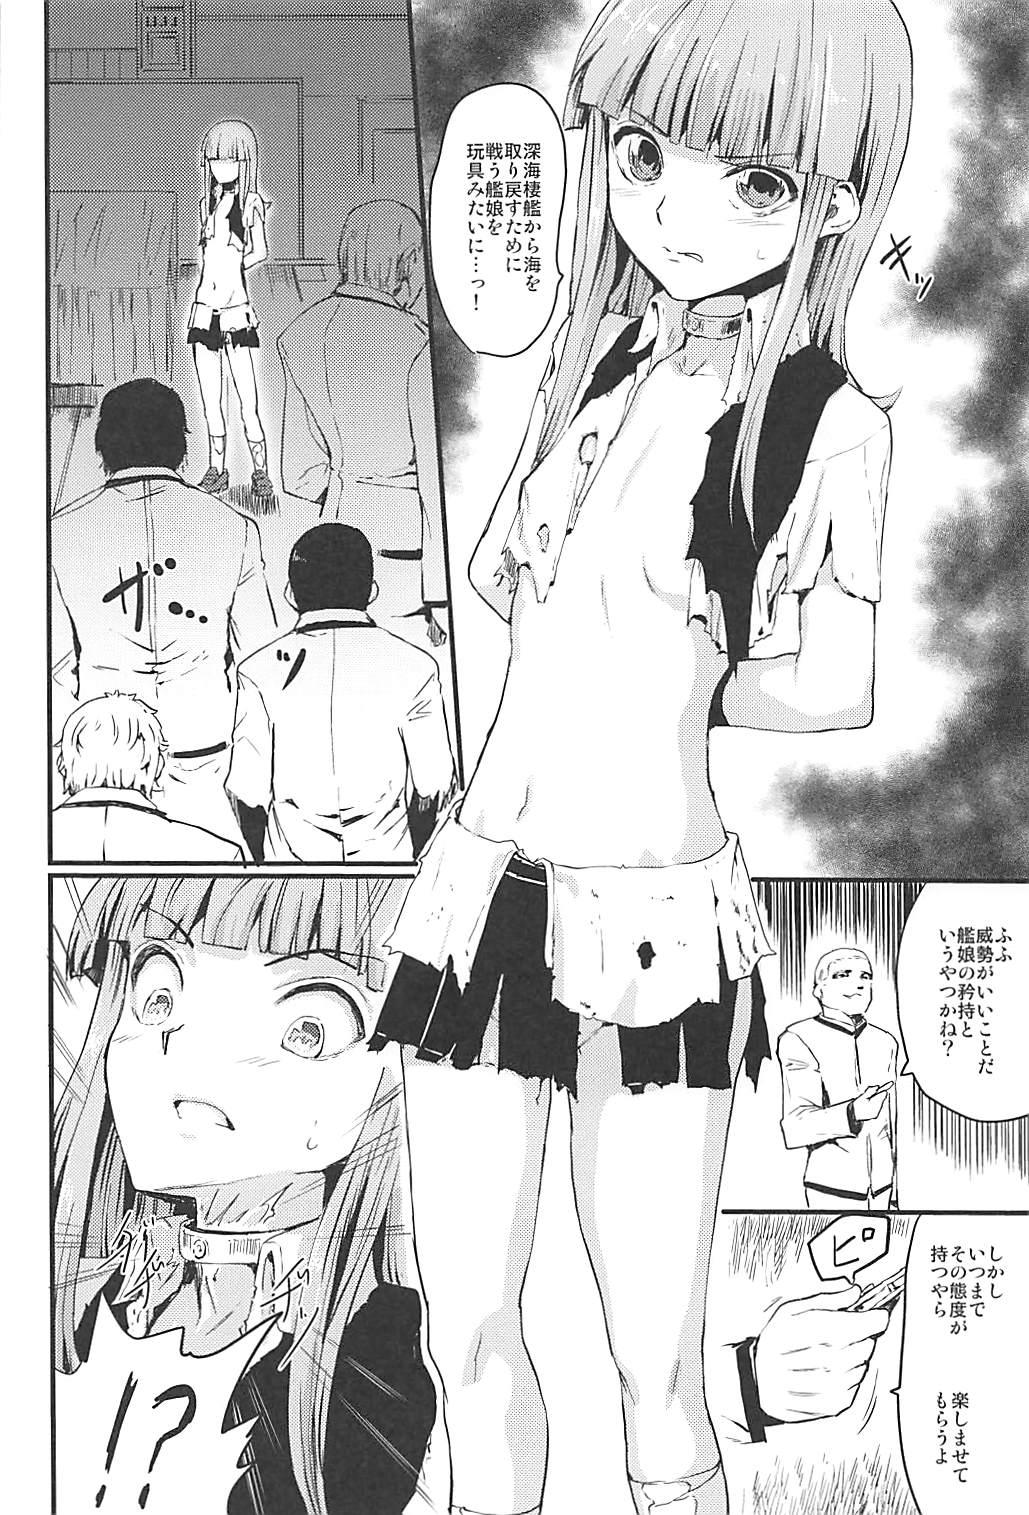 Money WHITE FESTIVAL - Kantai collection Chubby - Page 3